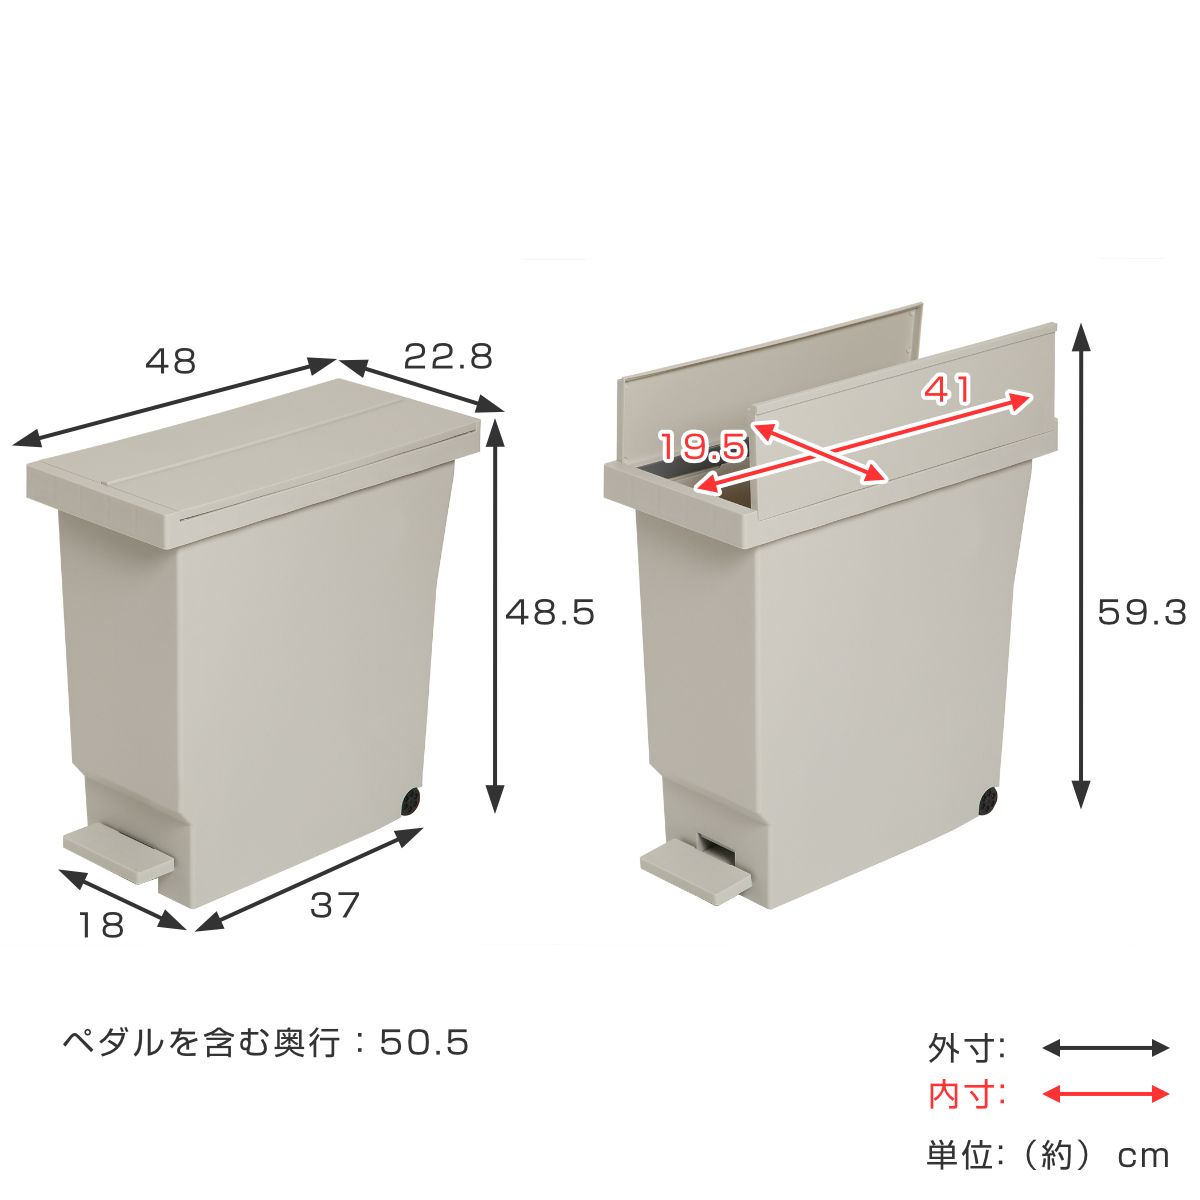  waste basket 32L butterfly pedal pale cover attaching ( 45L garbage bag correspondence 45 liter sack correspondence trash can 32 liter both opening shelves under counter under slim minute another )